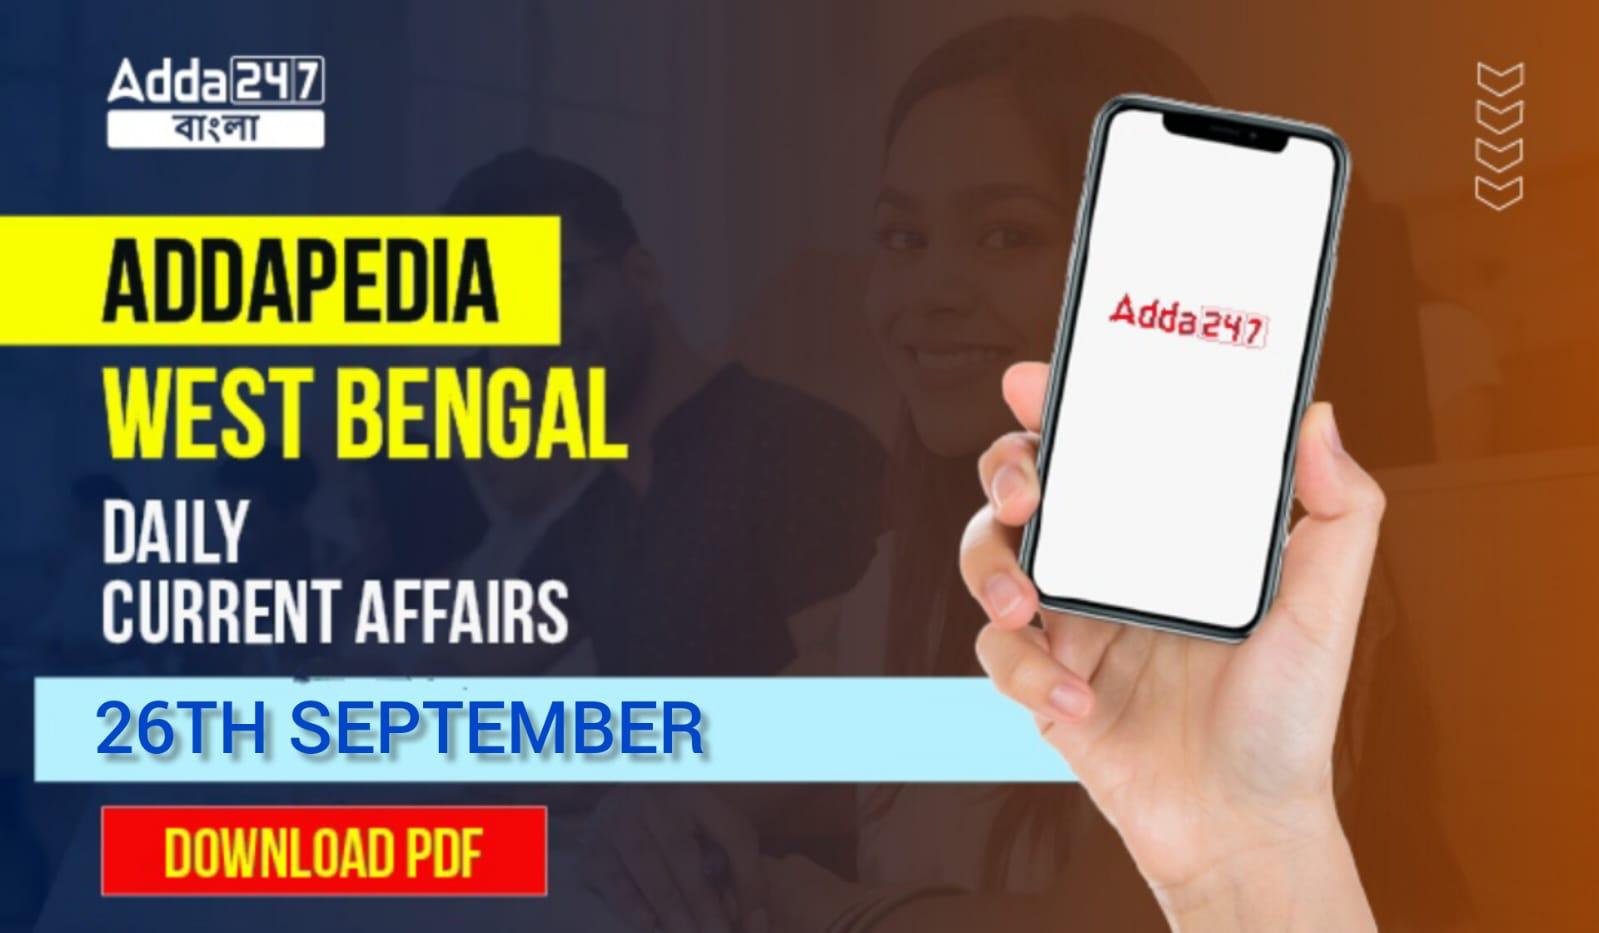 ADDAPEDIA West Bengal- Daily Current Affairs